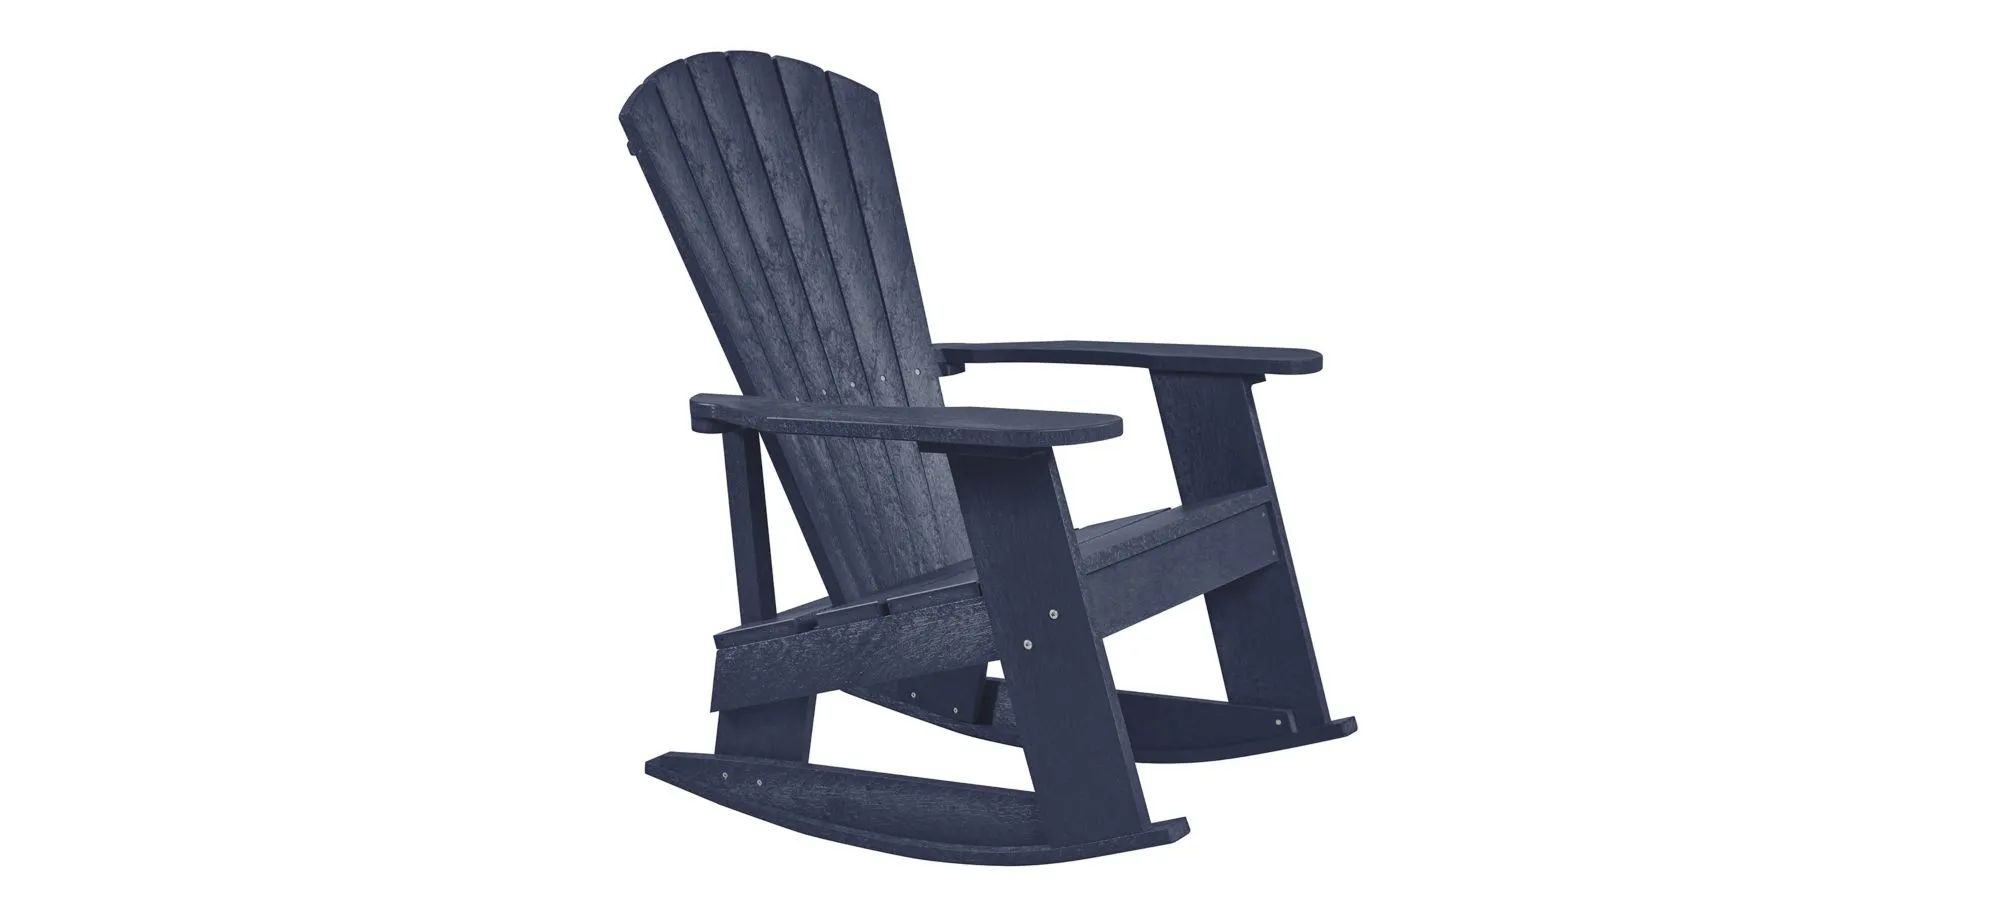 Capterra Casual Recycled Outdoor Adirondack Rocker in Atlantic Navy by C.R. Plastic Products